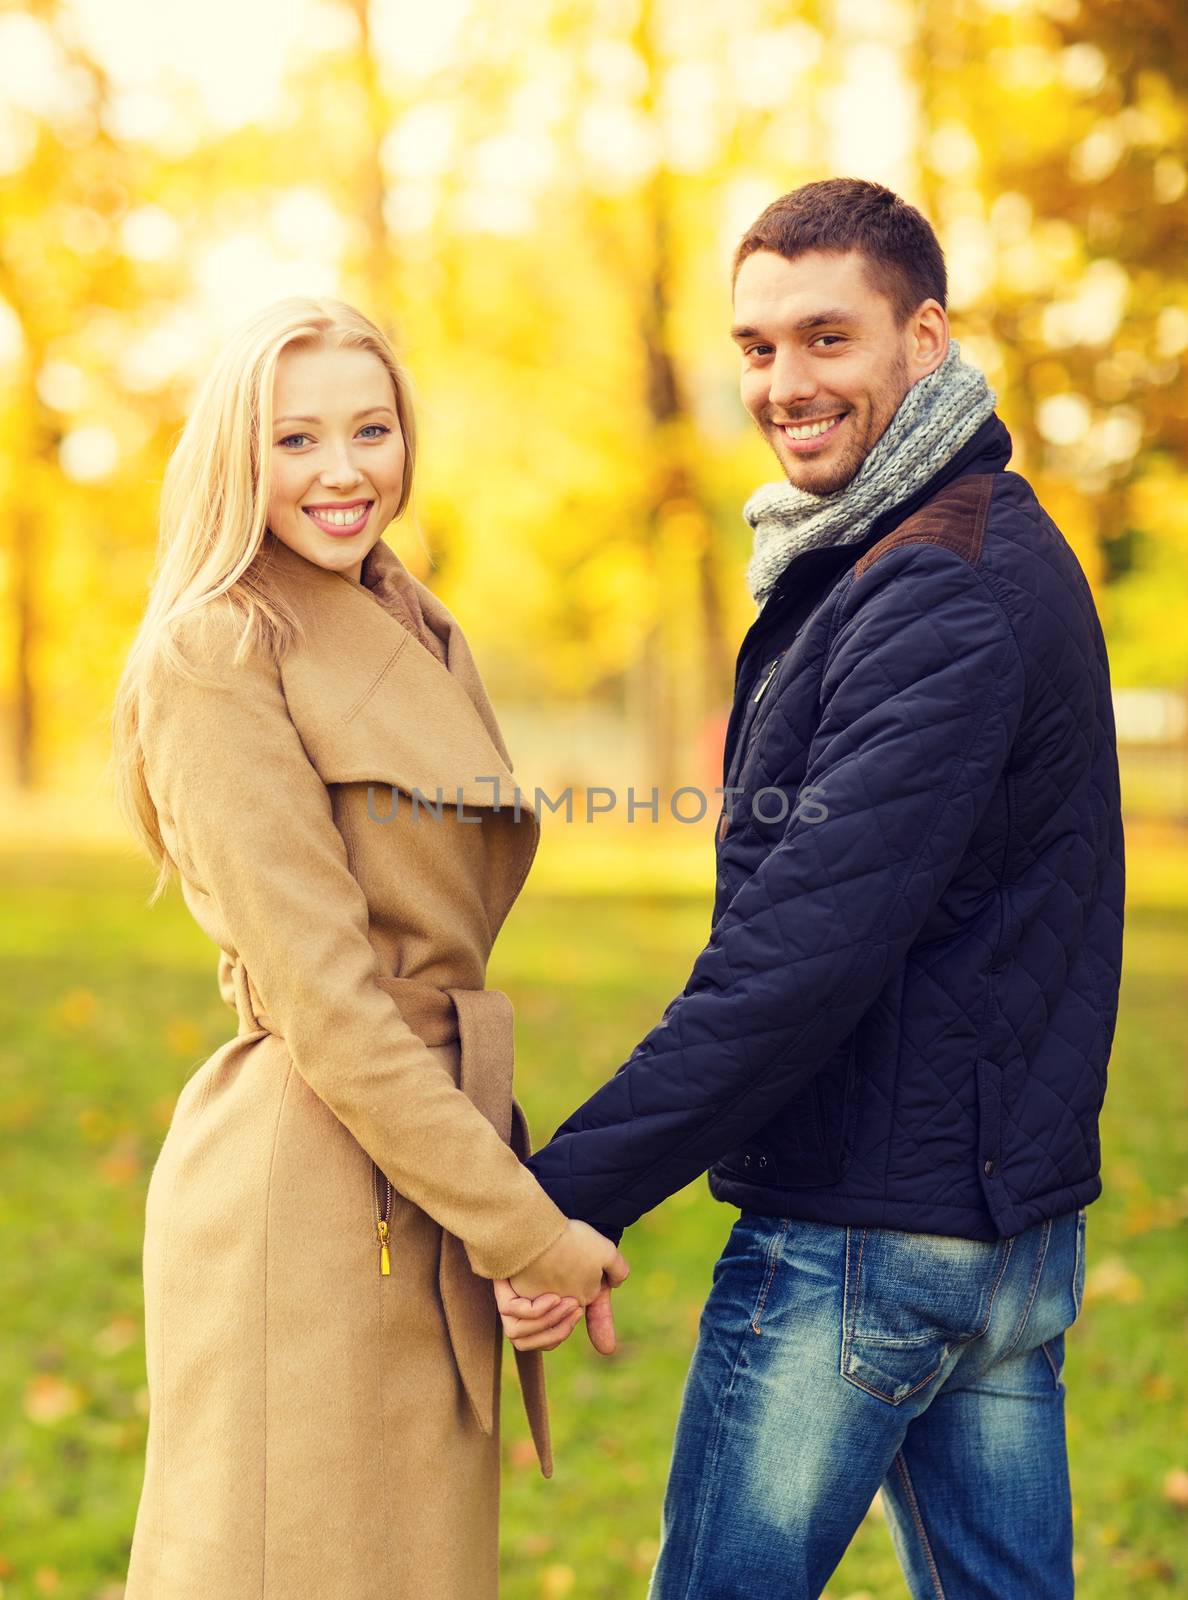 holidays, love, travel, relationship and dating concept - romantic couple in the autumn park